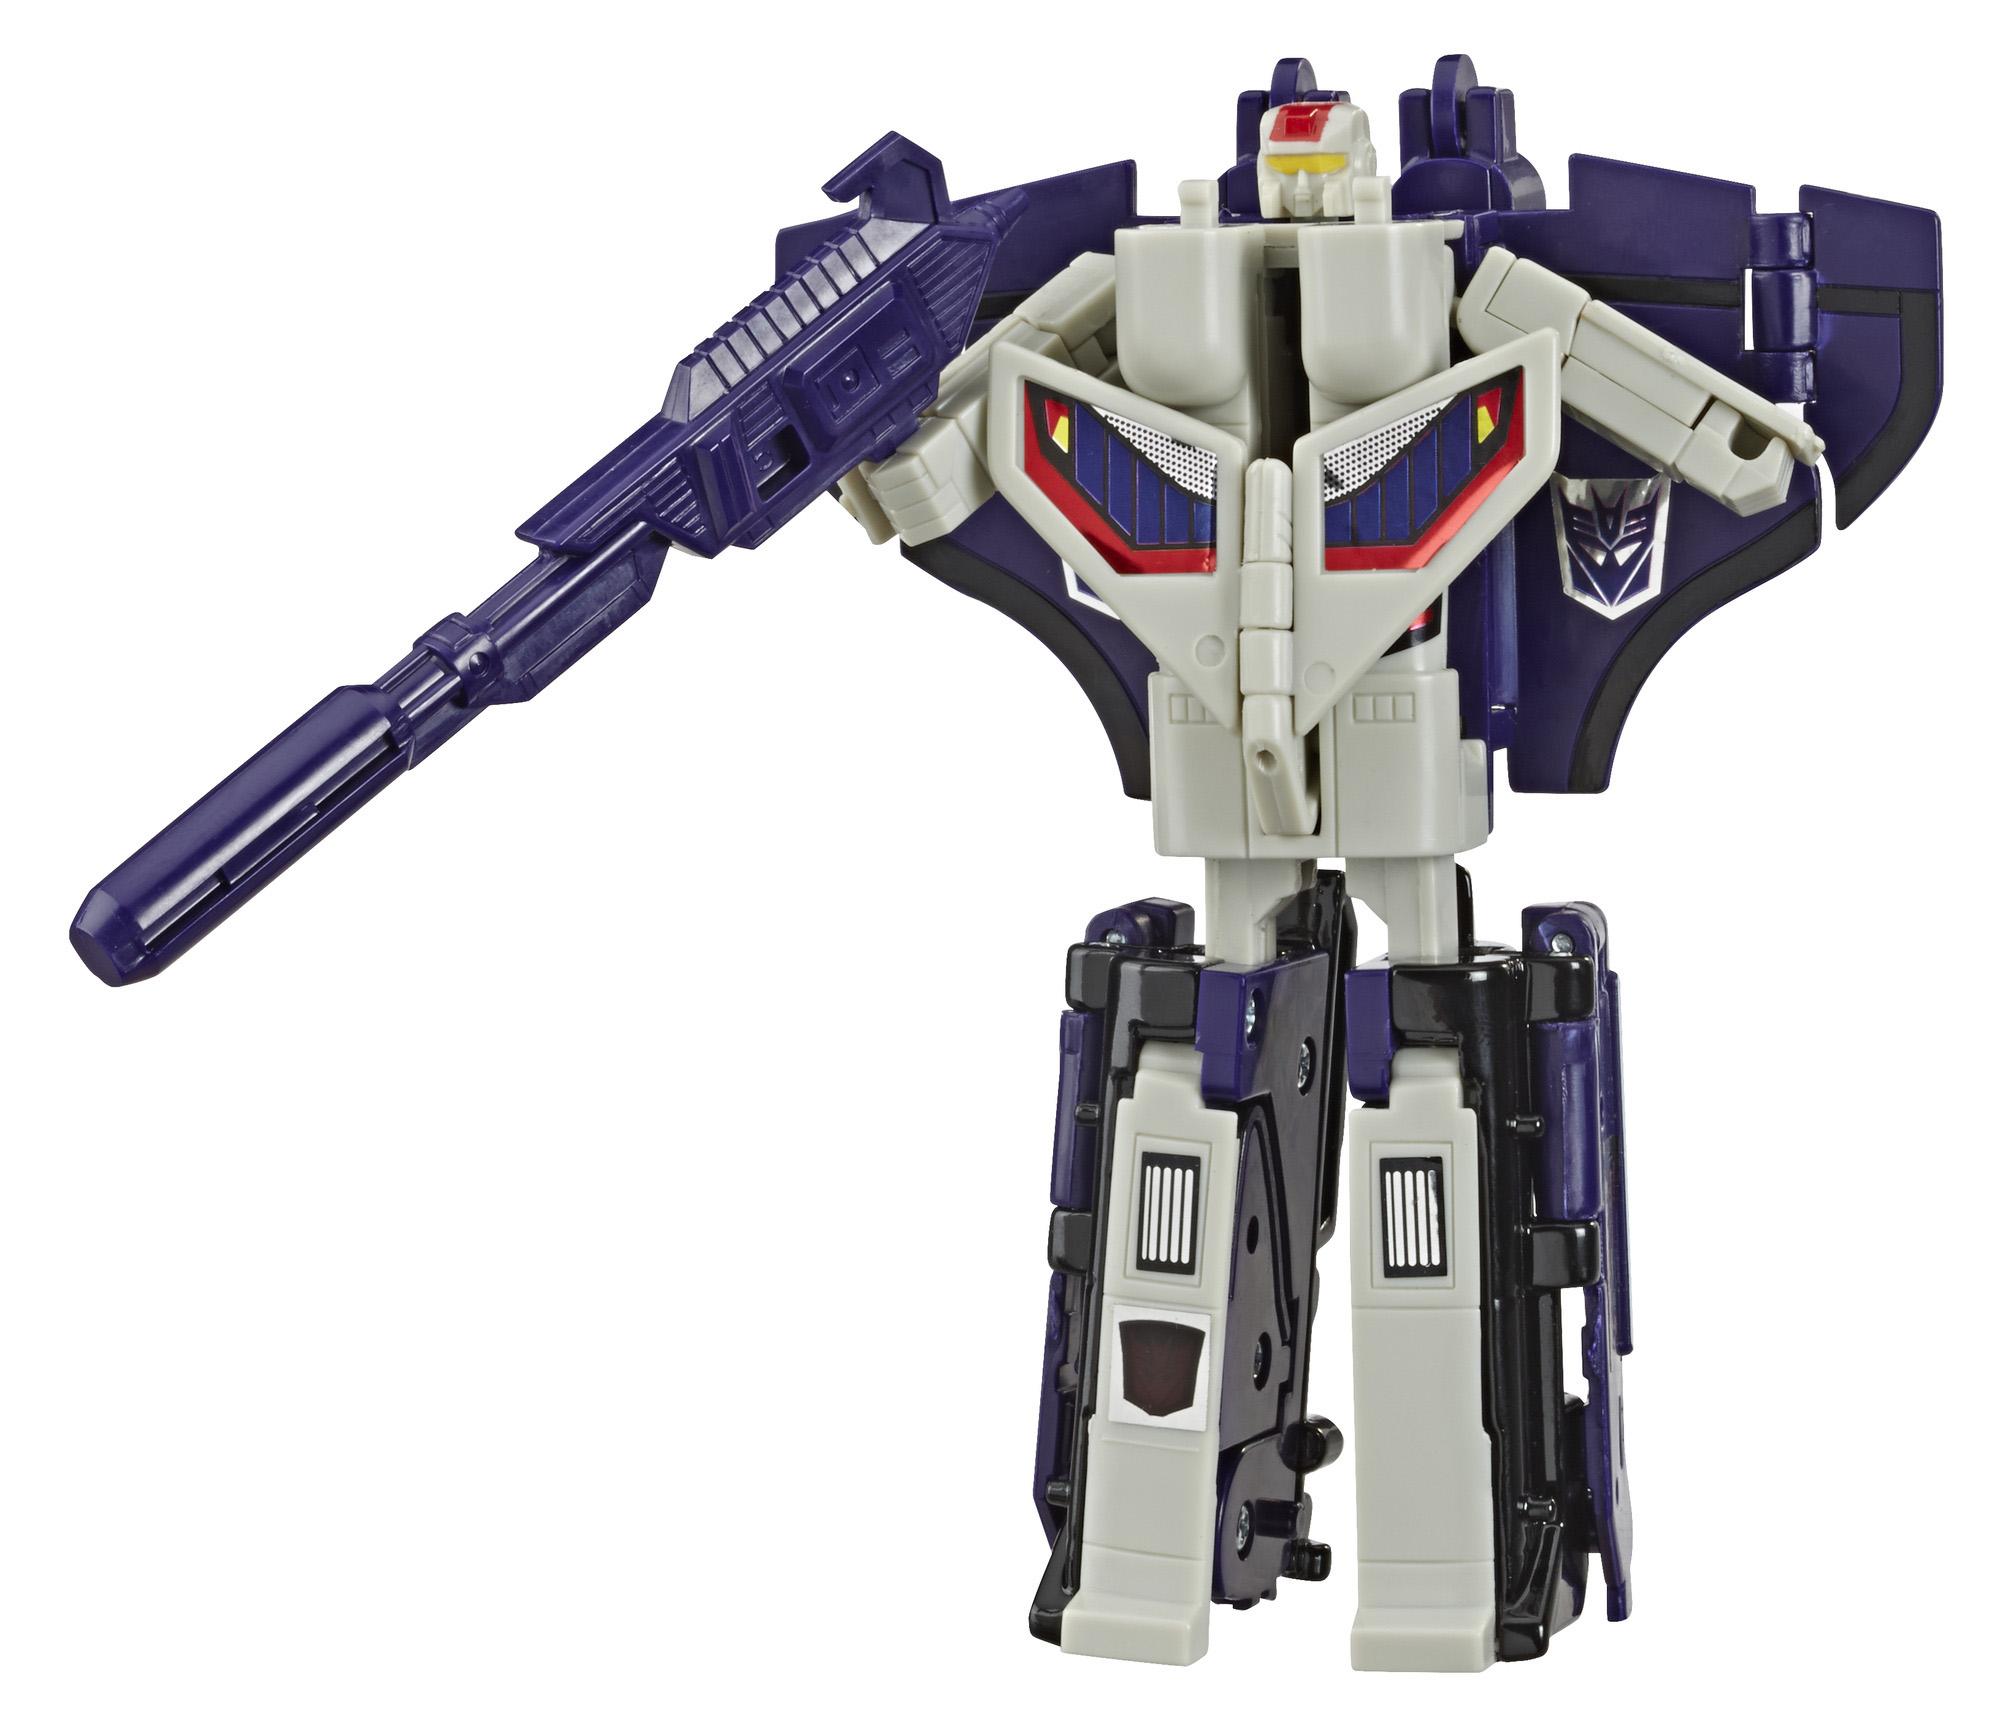 Transformers Toys Vintage G1 Astrotrain Action Figure for $30.73